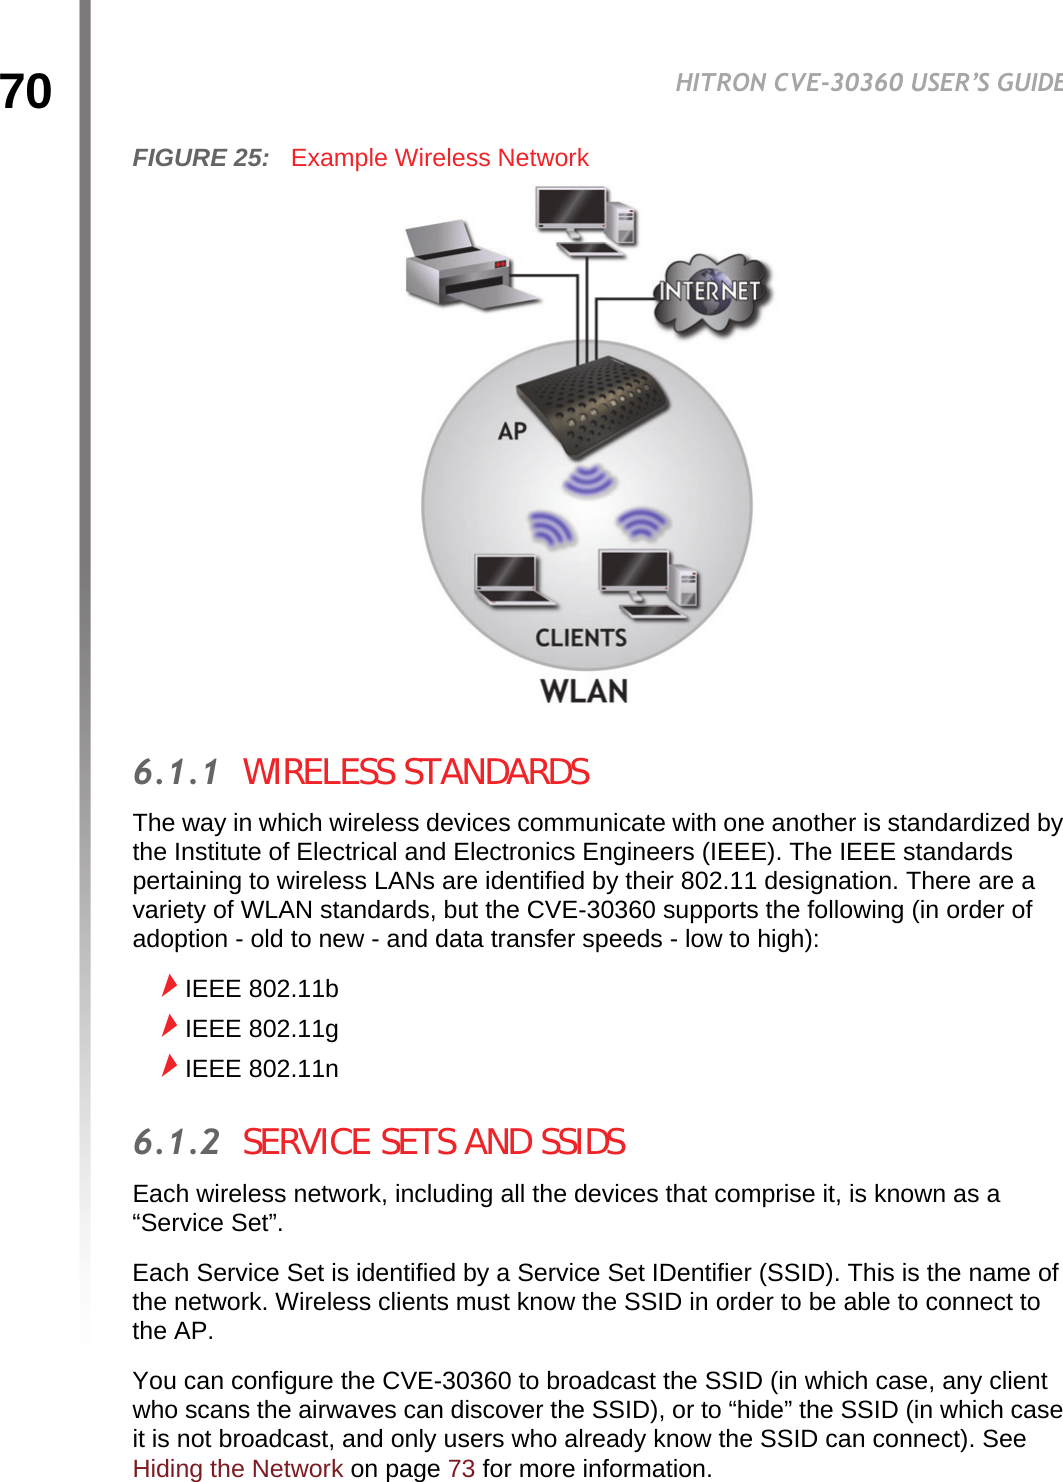 70HITRON CVE-30360 USER’S GUIDEWIRELESSFIGURE 25:   Example Wireless Network6.1.1  WIRELESS STANDARDSThe way in which wireless devices communicate with one another is standardized by the Institute of Electrical and Electronics Engineers (IEEE). The IEEE standards pertaining to wireless LANs are identified by their 802.11 designation. There are a variety of WLAN standards, but the CVE-30360 supports the following (in order of adoption - old to new - and data transfer speeds - low to high):IEEE 802.11bIEEE 802.11gIEEE 802.11n6.1.2  SERVICE SETS AND SSIDSEach wireless network, including all the devices that comprise it, is known as a “Service Set”.Each Service Set is identified by a Service Set IDentifier (SSID). This is the name of the network. Wireless clients must know the SSID in order to be able to connect to the AP.You can configure the CVE-30360 to broadcast the SSID (in which case, any client who scans the airwaves can discover the SSID), or to “hide” the SSID (in which case it is not broadcast, and only users who already know the SSID can connect). See Hiding the Network on page 73 for more information.